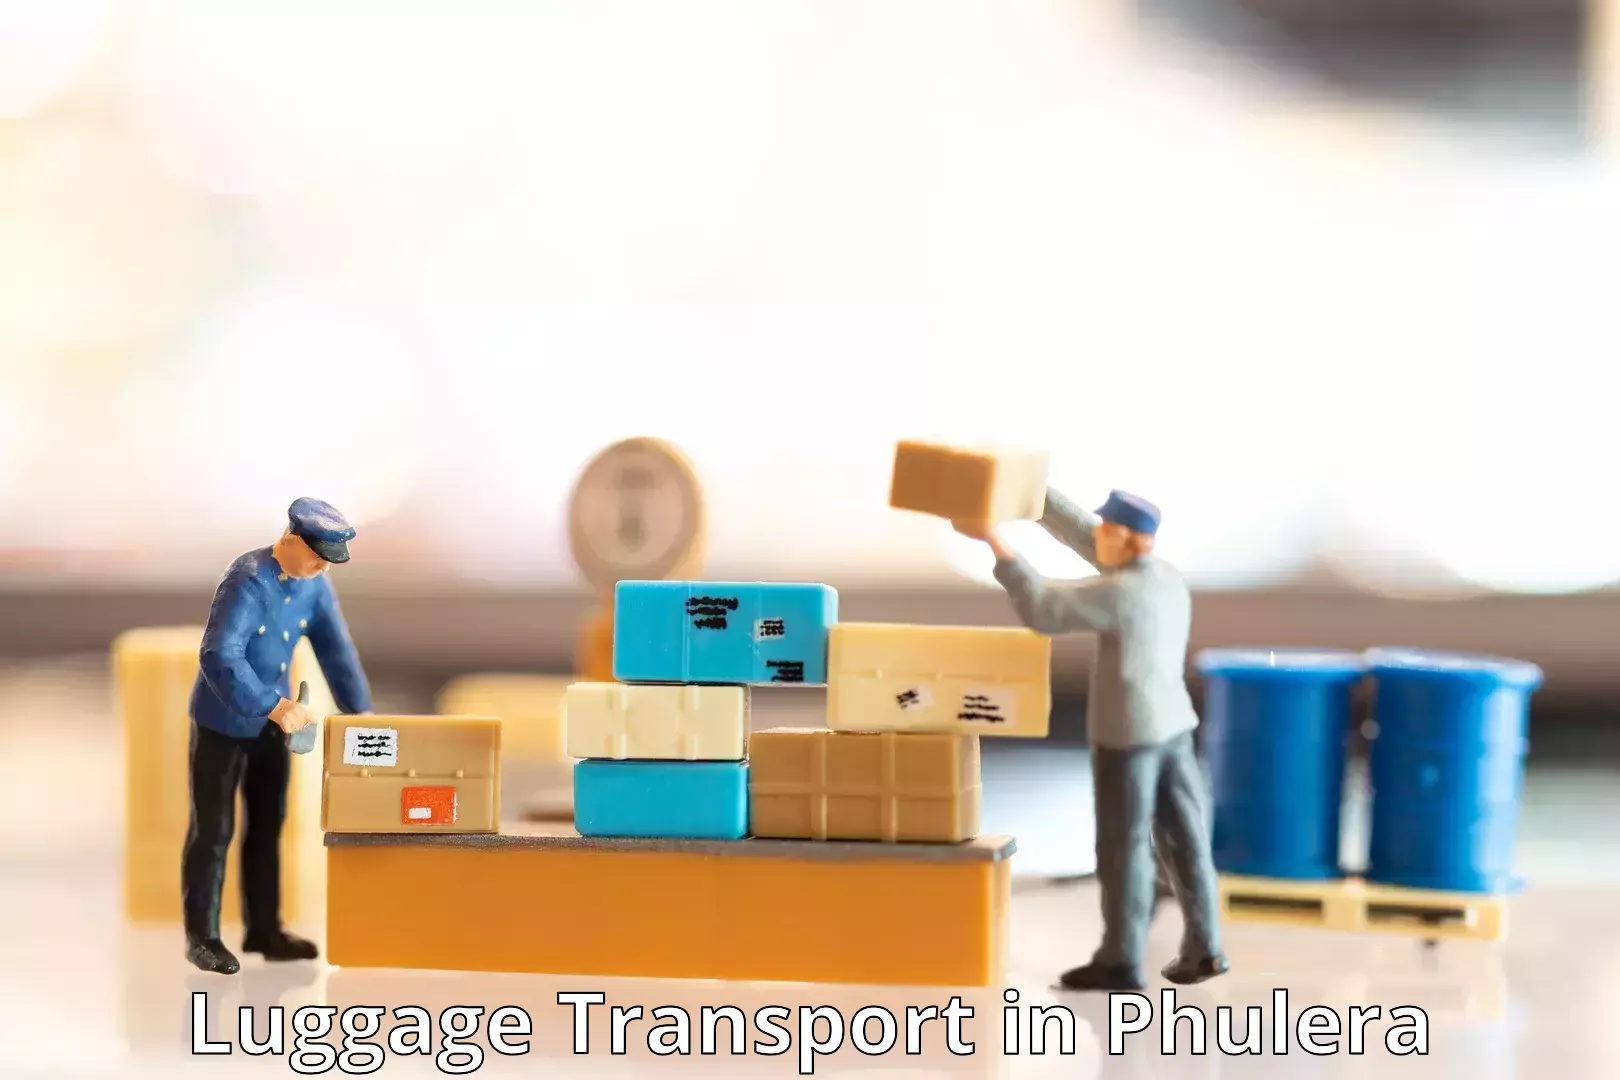 Luggage transport guidelines in Phulera